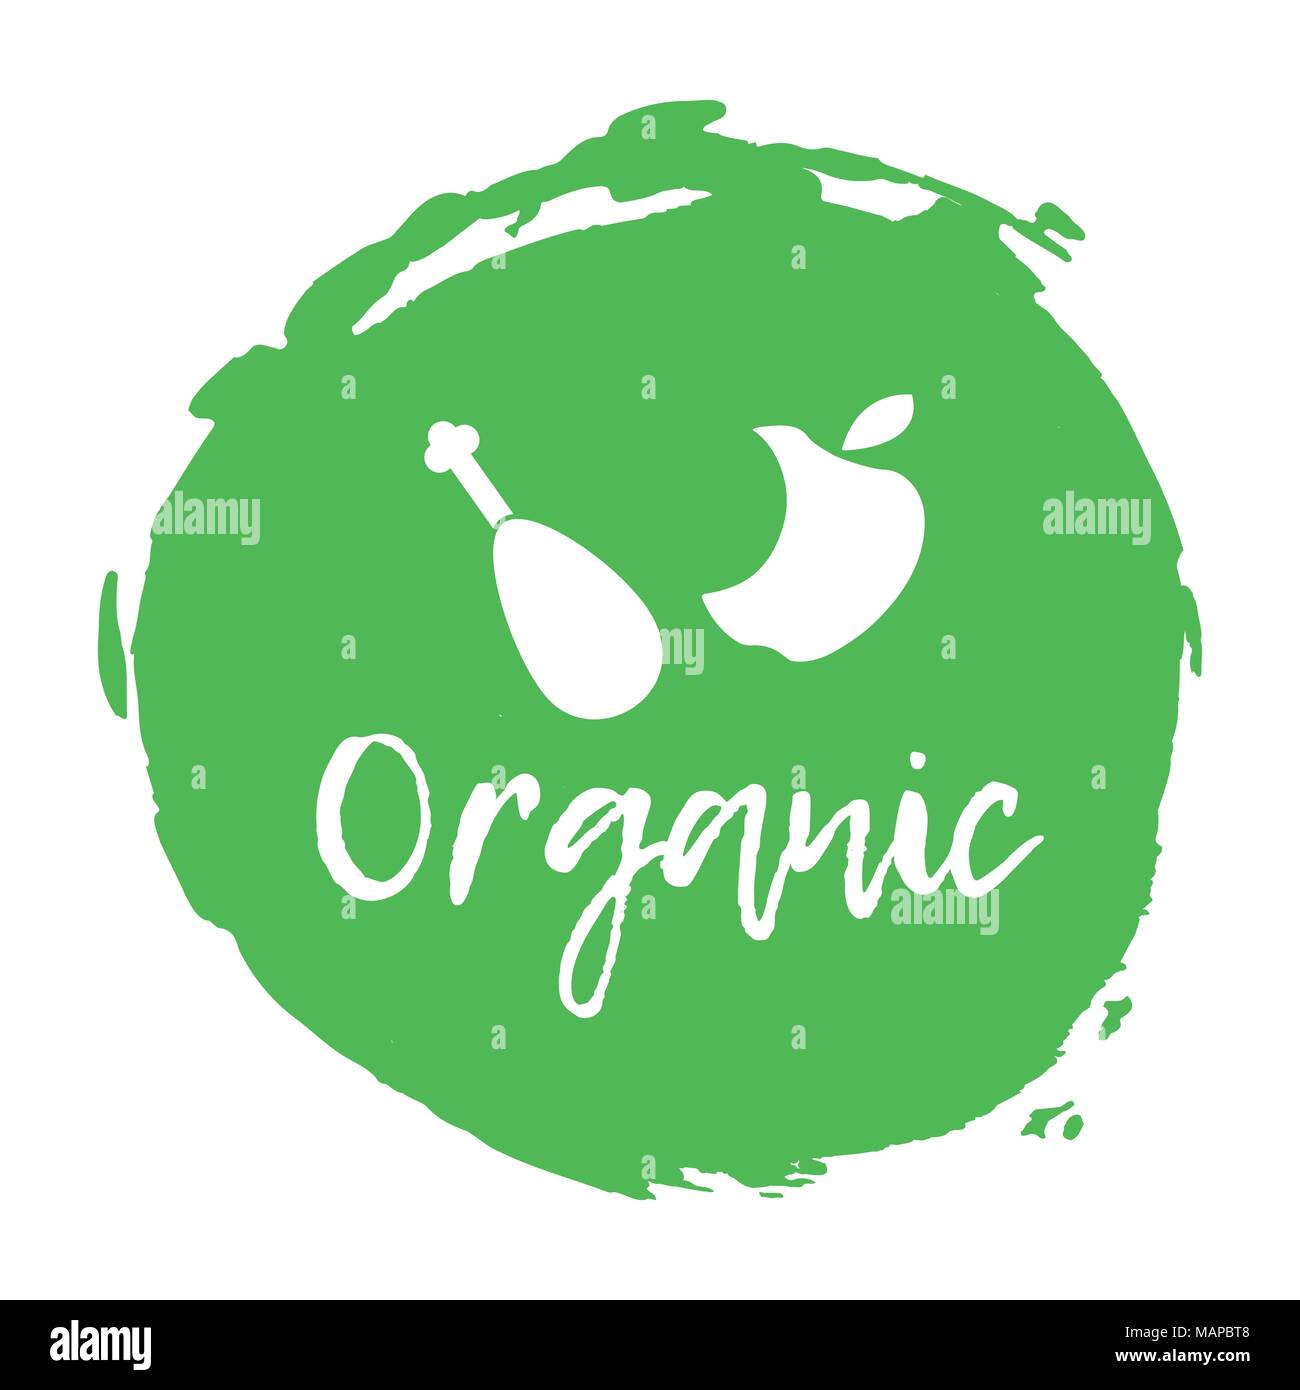 Recycling waste sorting icon - organic. Vector illustration. Stock Vector